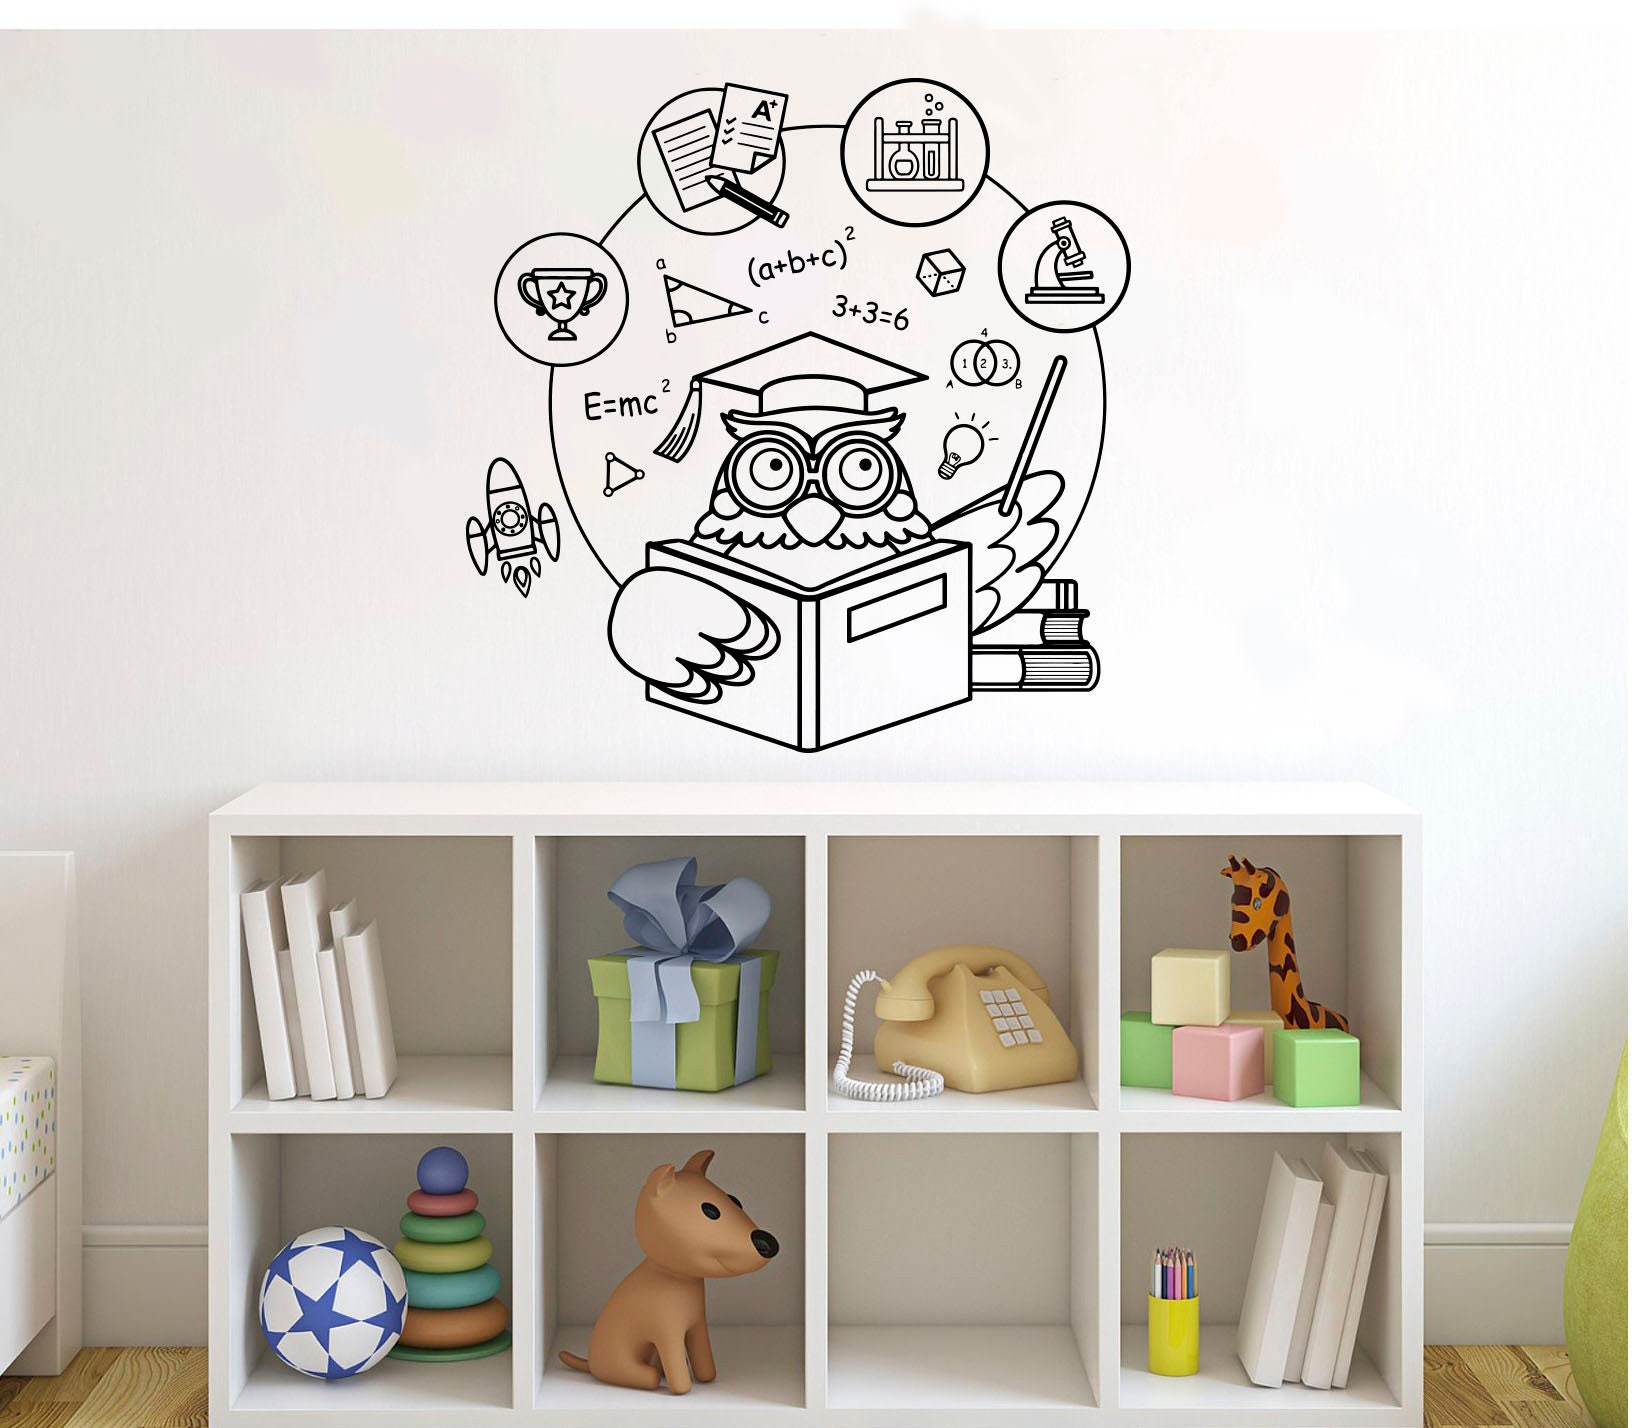 ig5140 Details about   Vinyl Wall Decal Education Owl Books School University College Stickers 